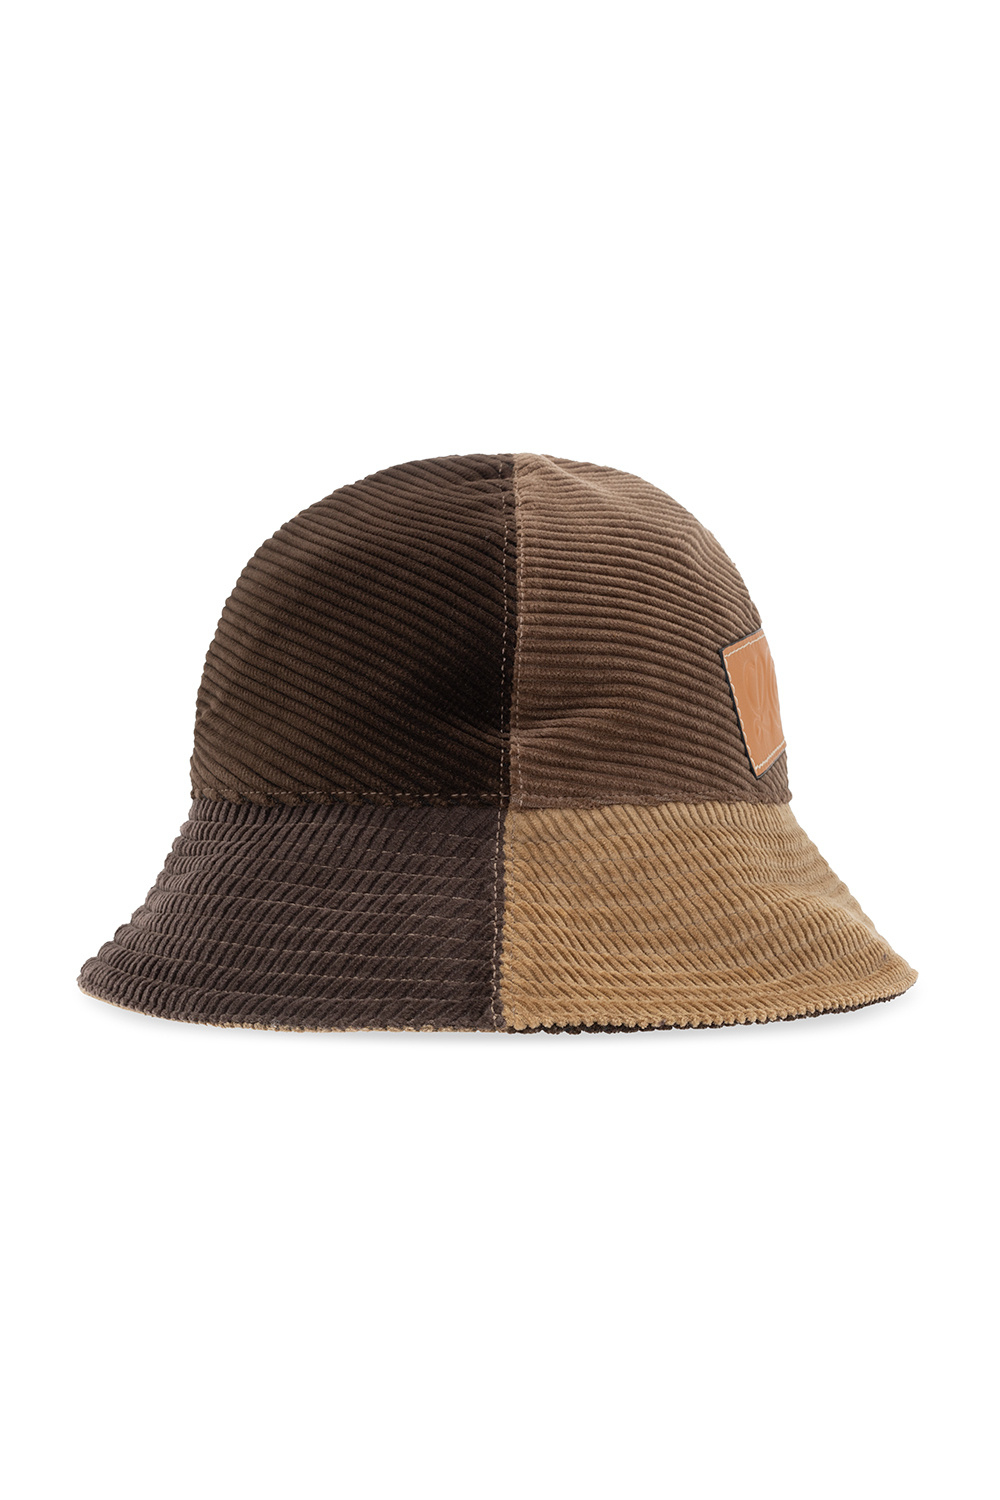 Loewe Logo-patched hat